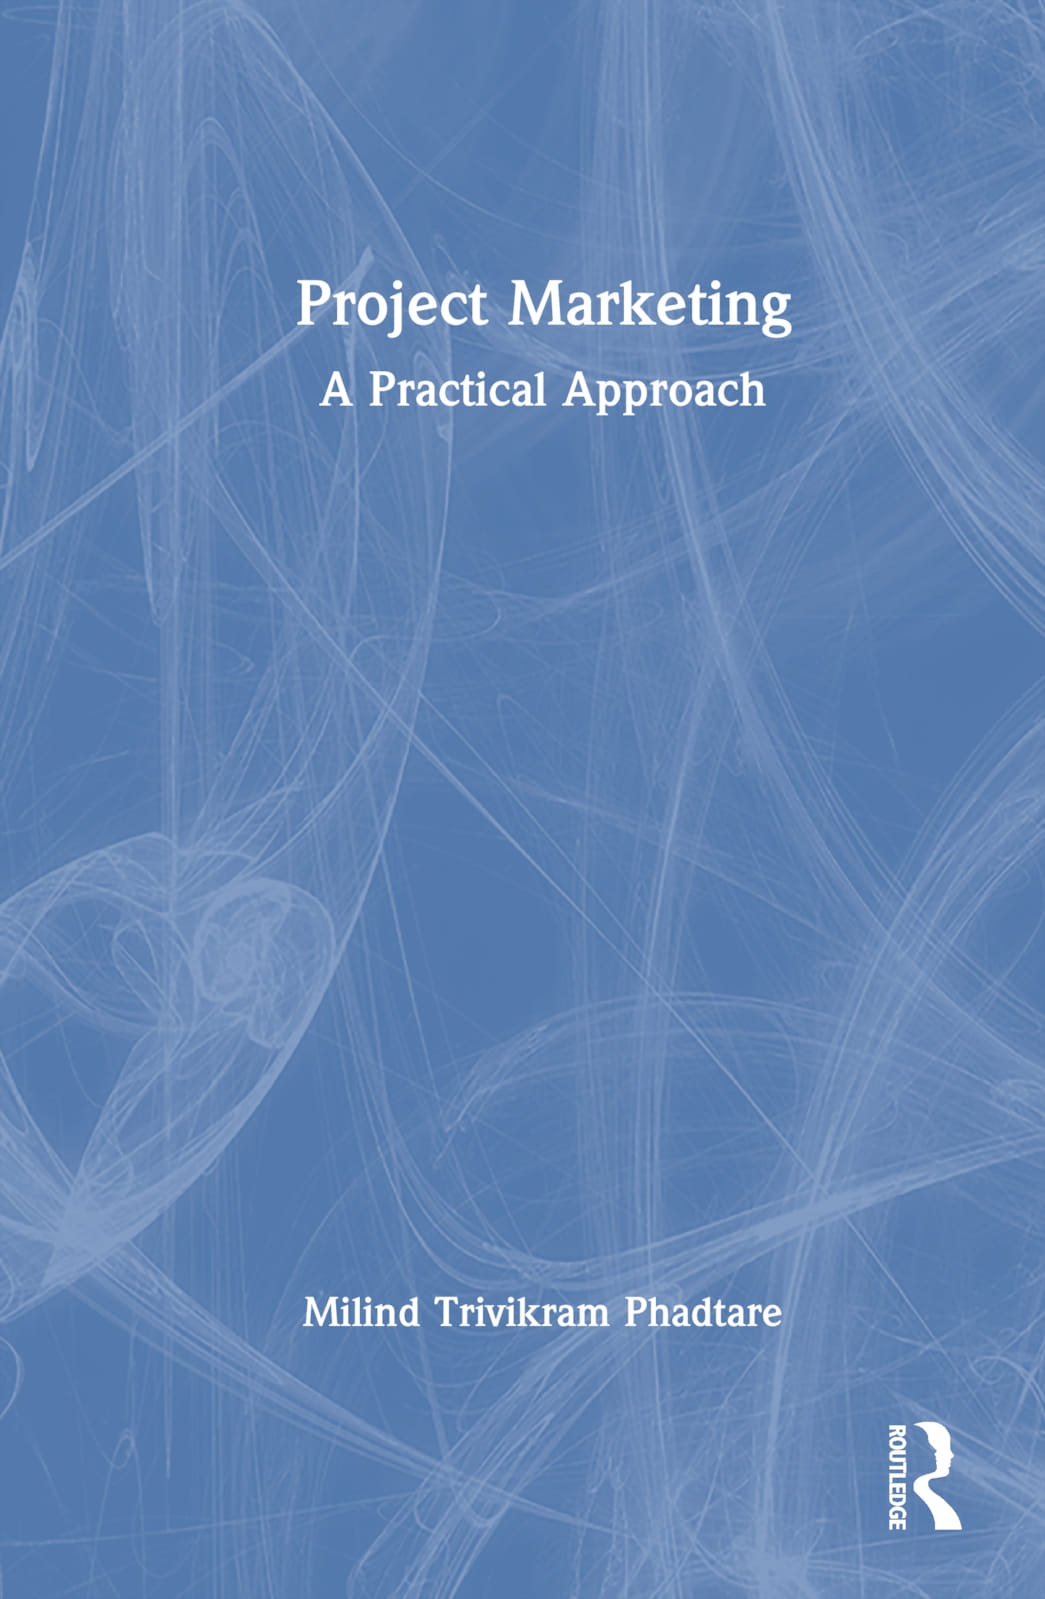 Project Marketing: A Practical Approach